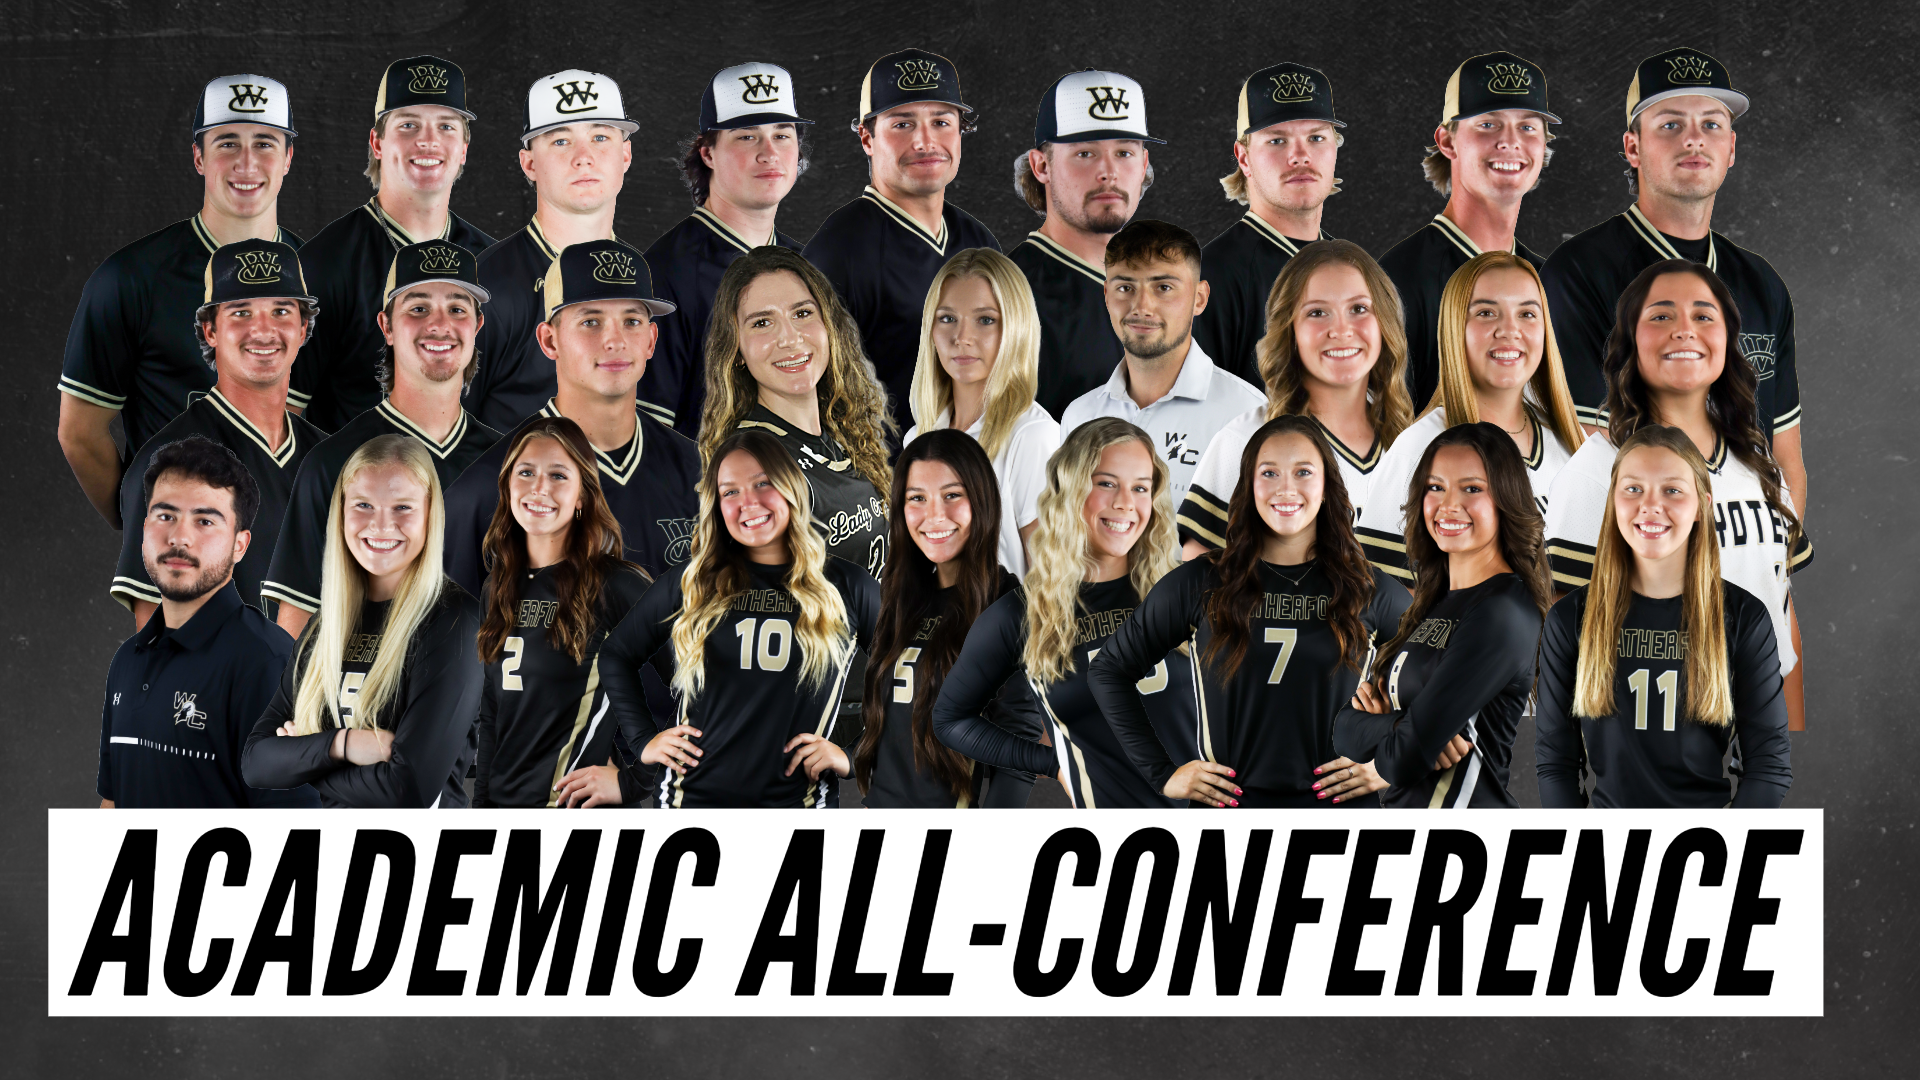 27 Coyote athletes named Academic All-Conference